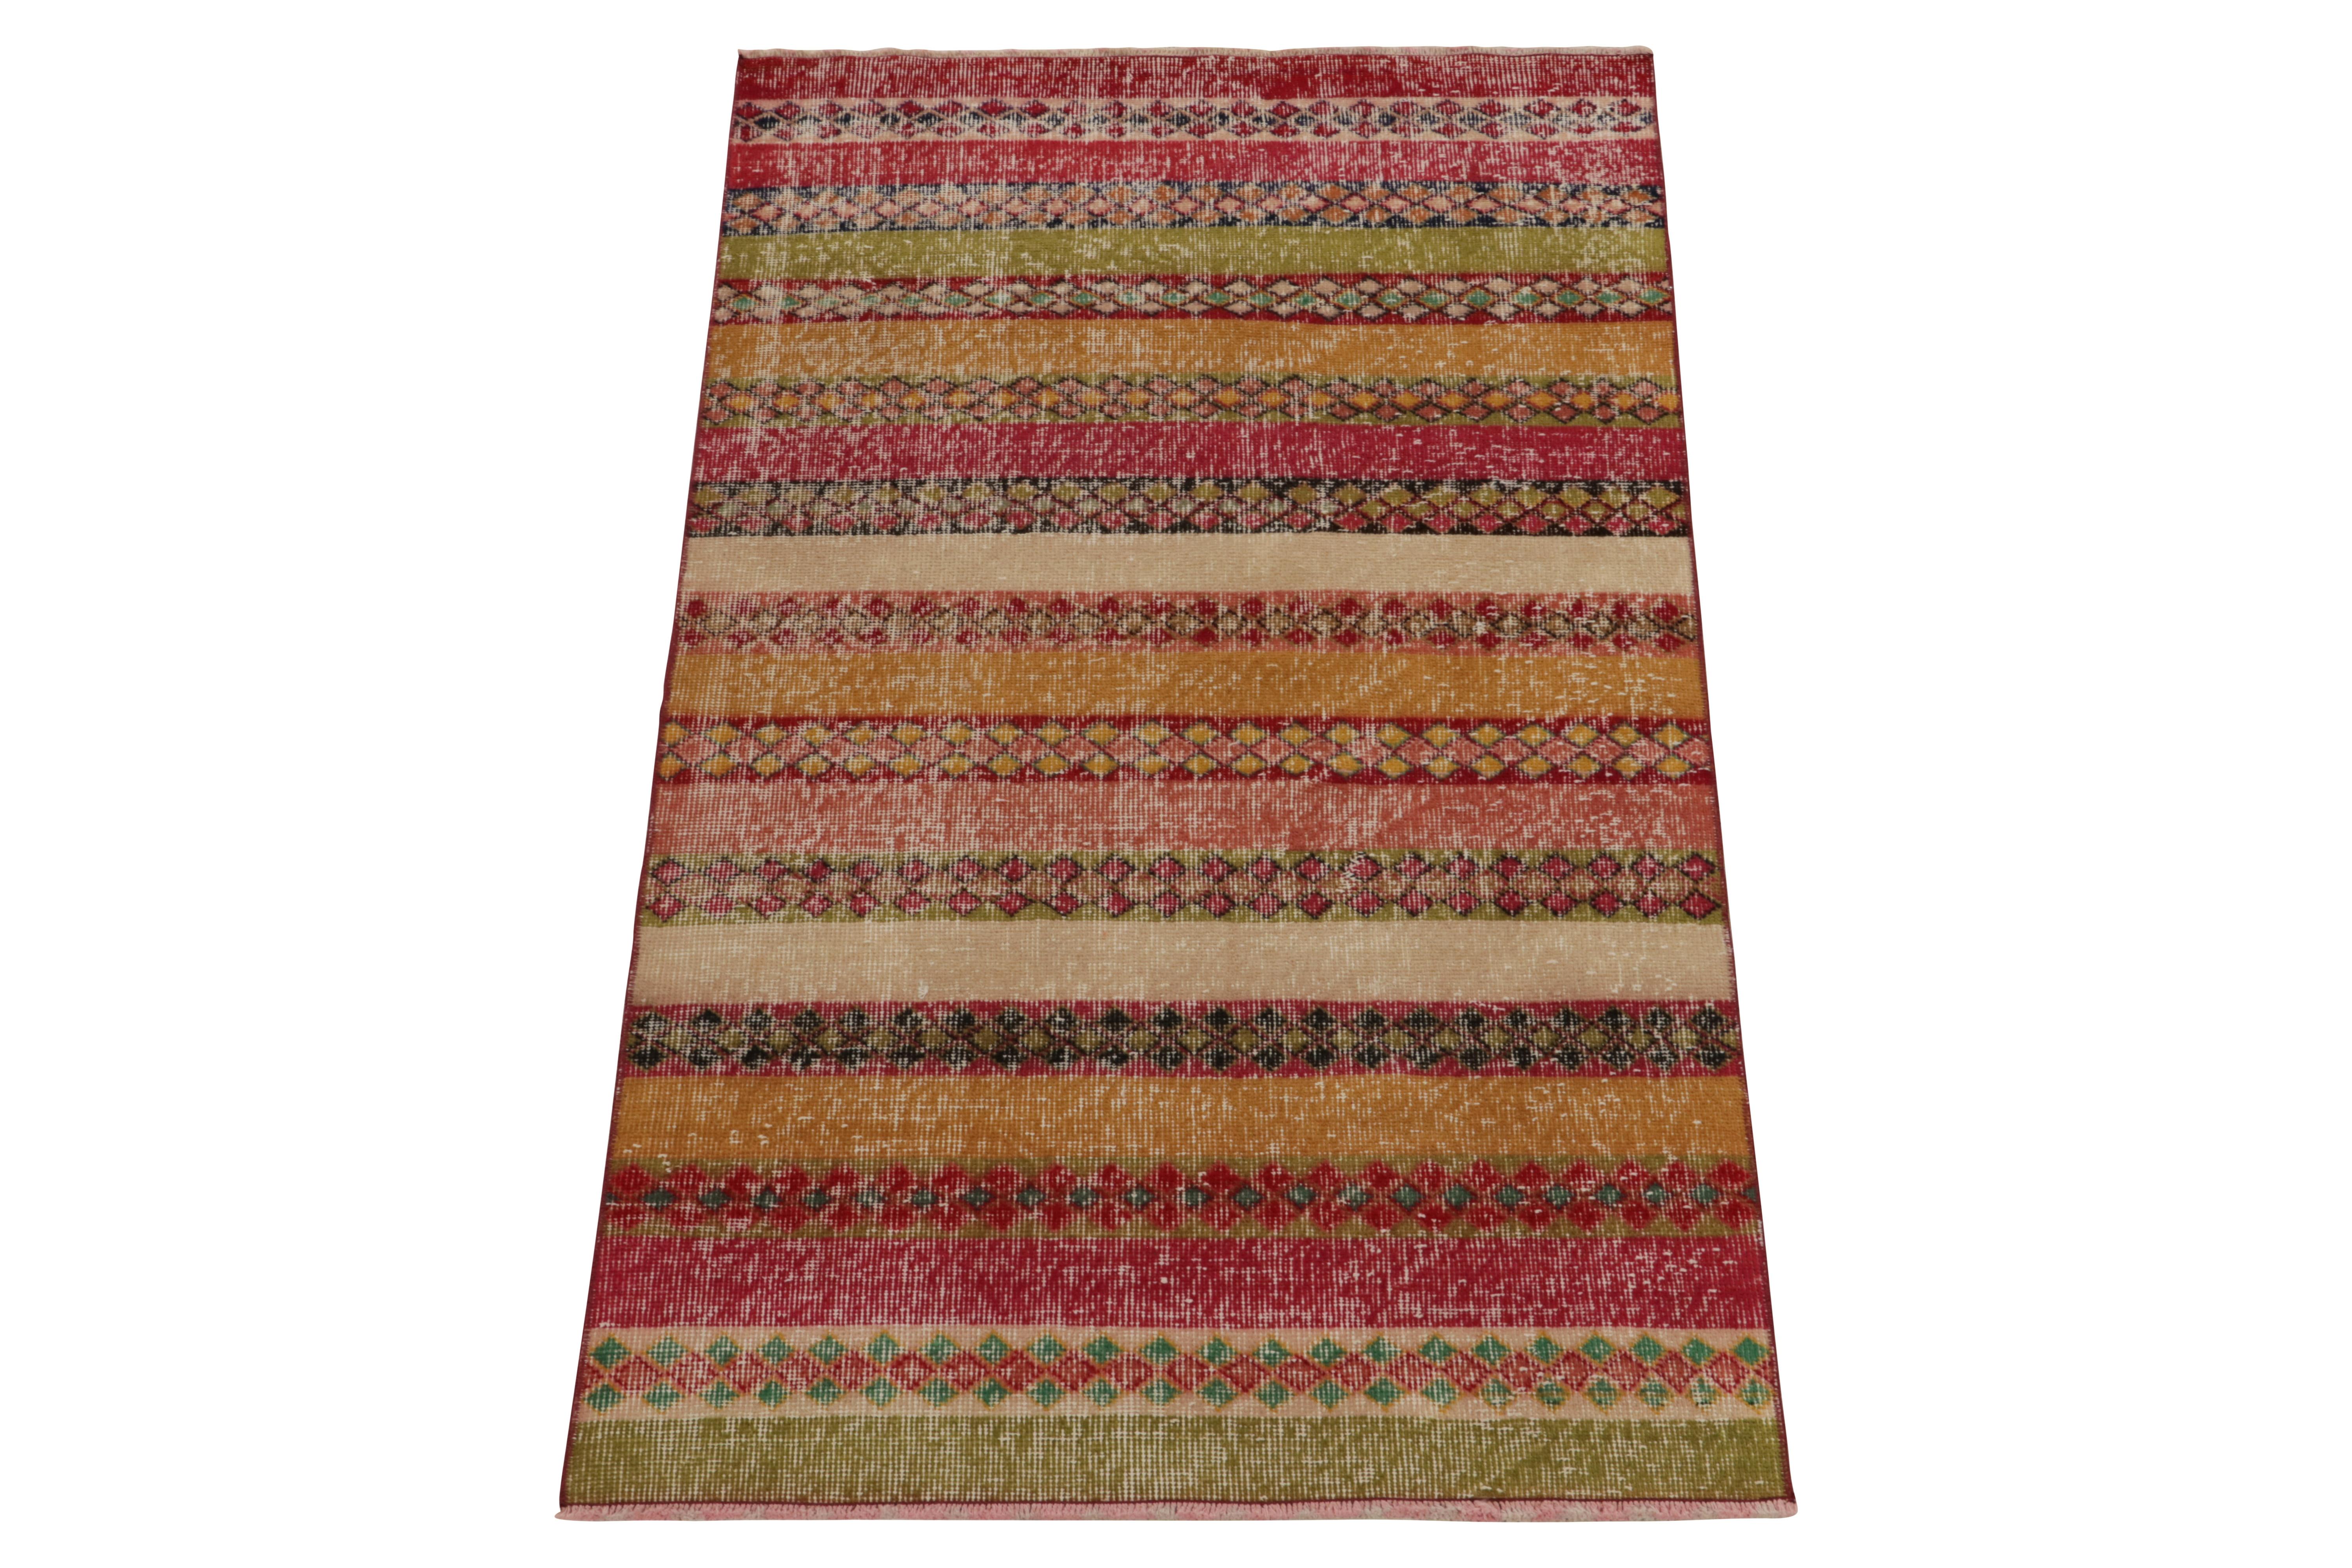 Hand-knotted in wool originating from Turkey circa 1960-1970, this vintage 3 x 6 Deco runner belongs to Rug & Kilim’s expansive Mid-Century Pasha collection. A celebration of works believed to hail from a bold Turkish atelier from this